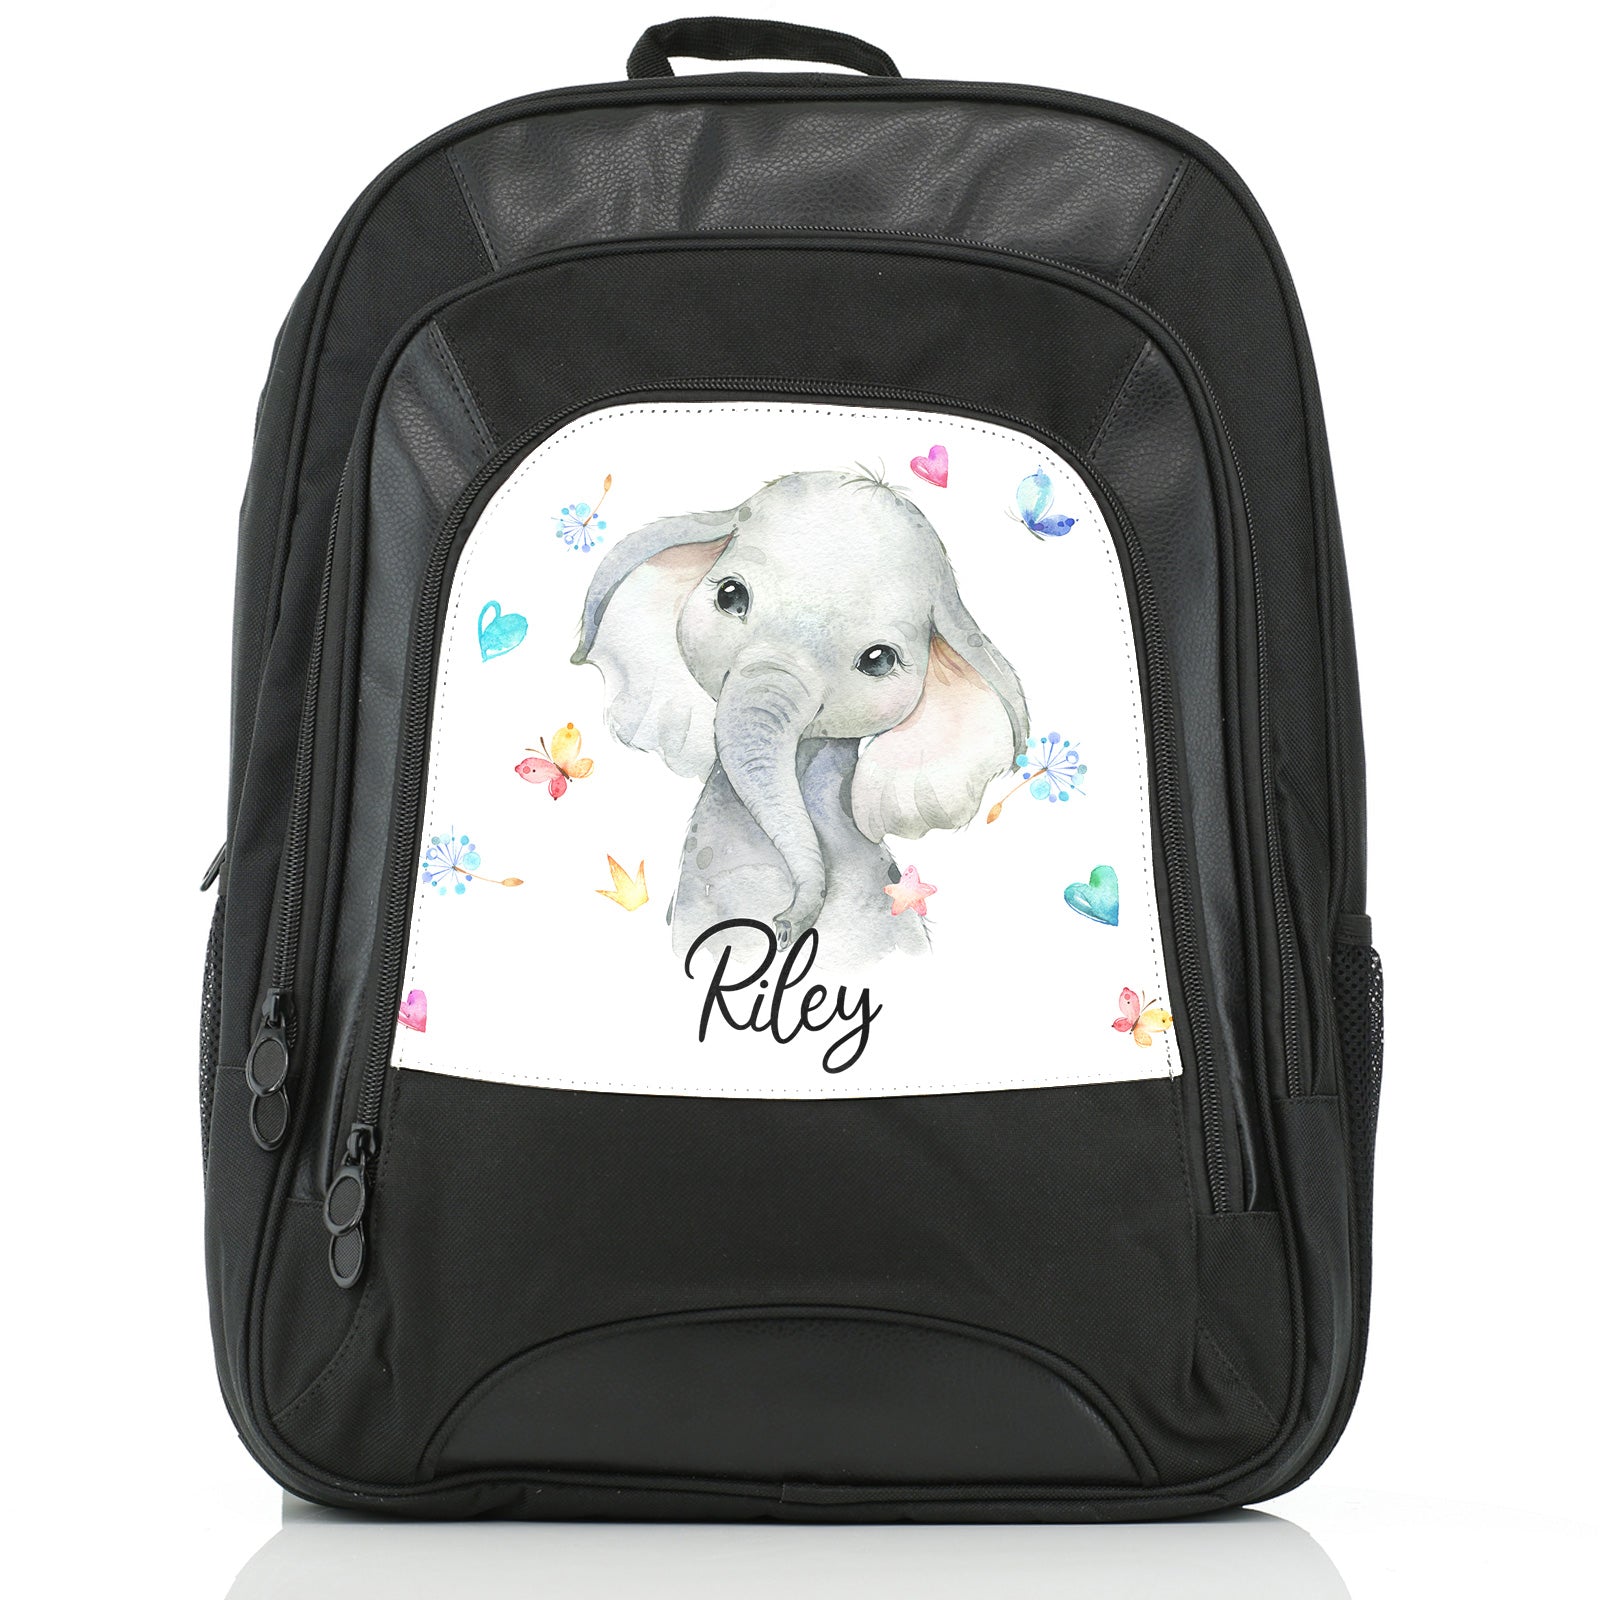 Personalised Large Multifunction Backpack with Grey Elephant with Hearts Stars Crowns Butterfly and Cute Text